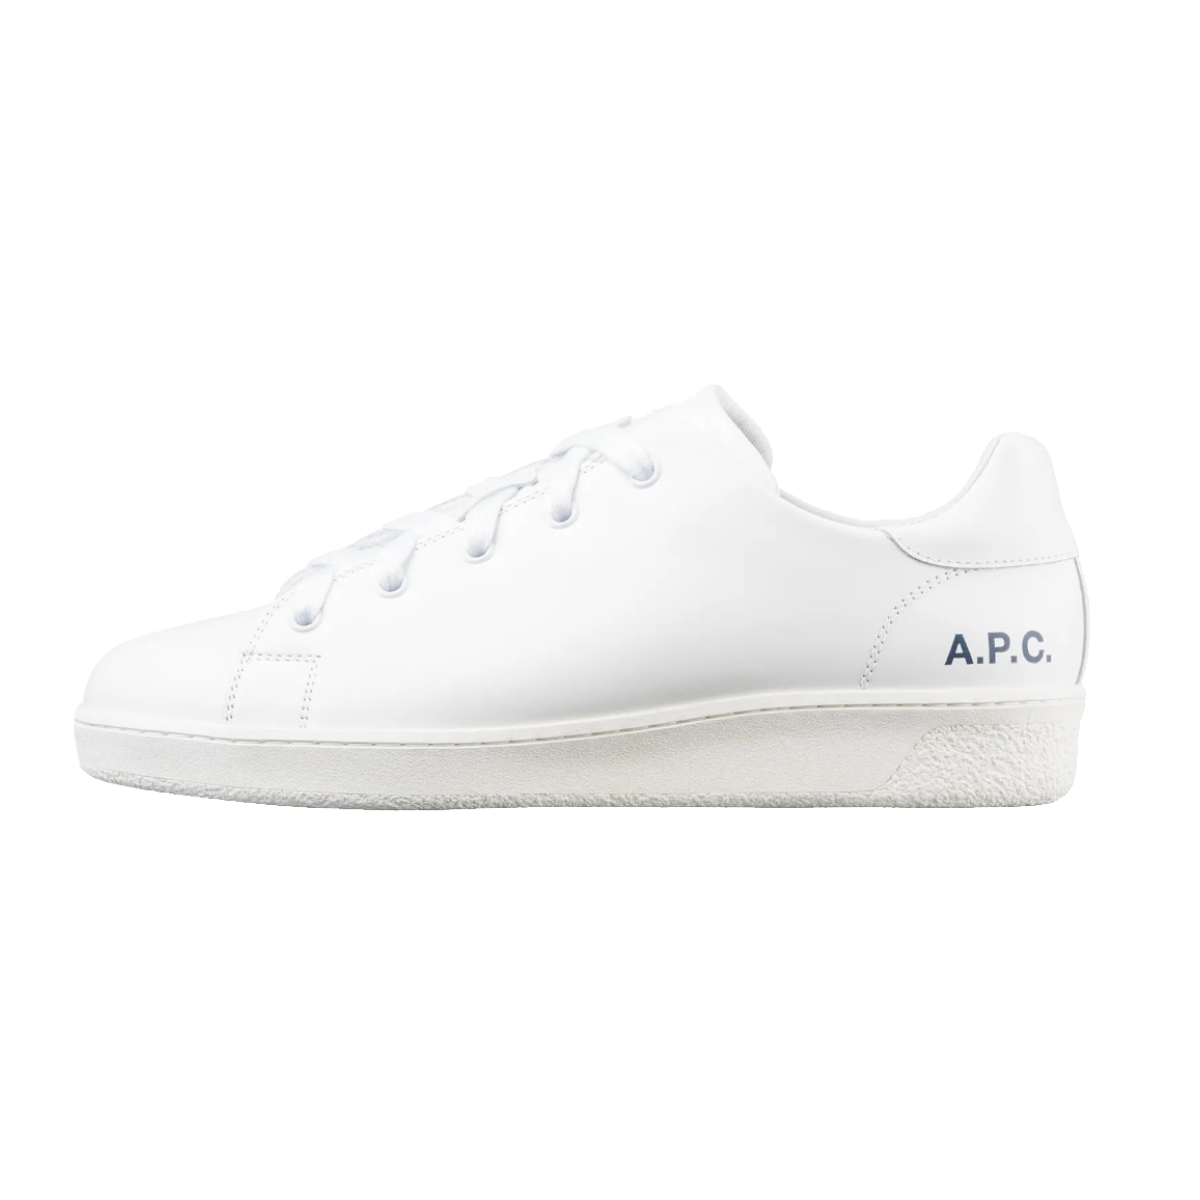 White APC sneakers in leather